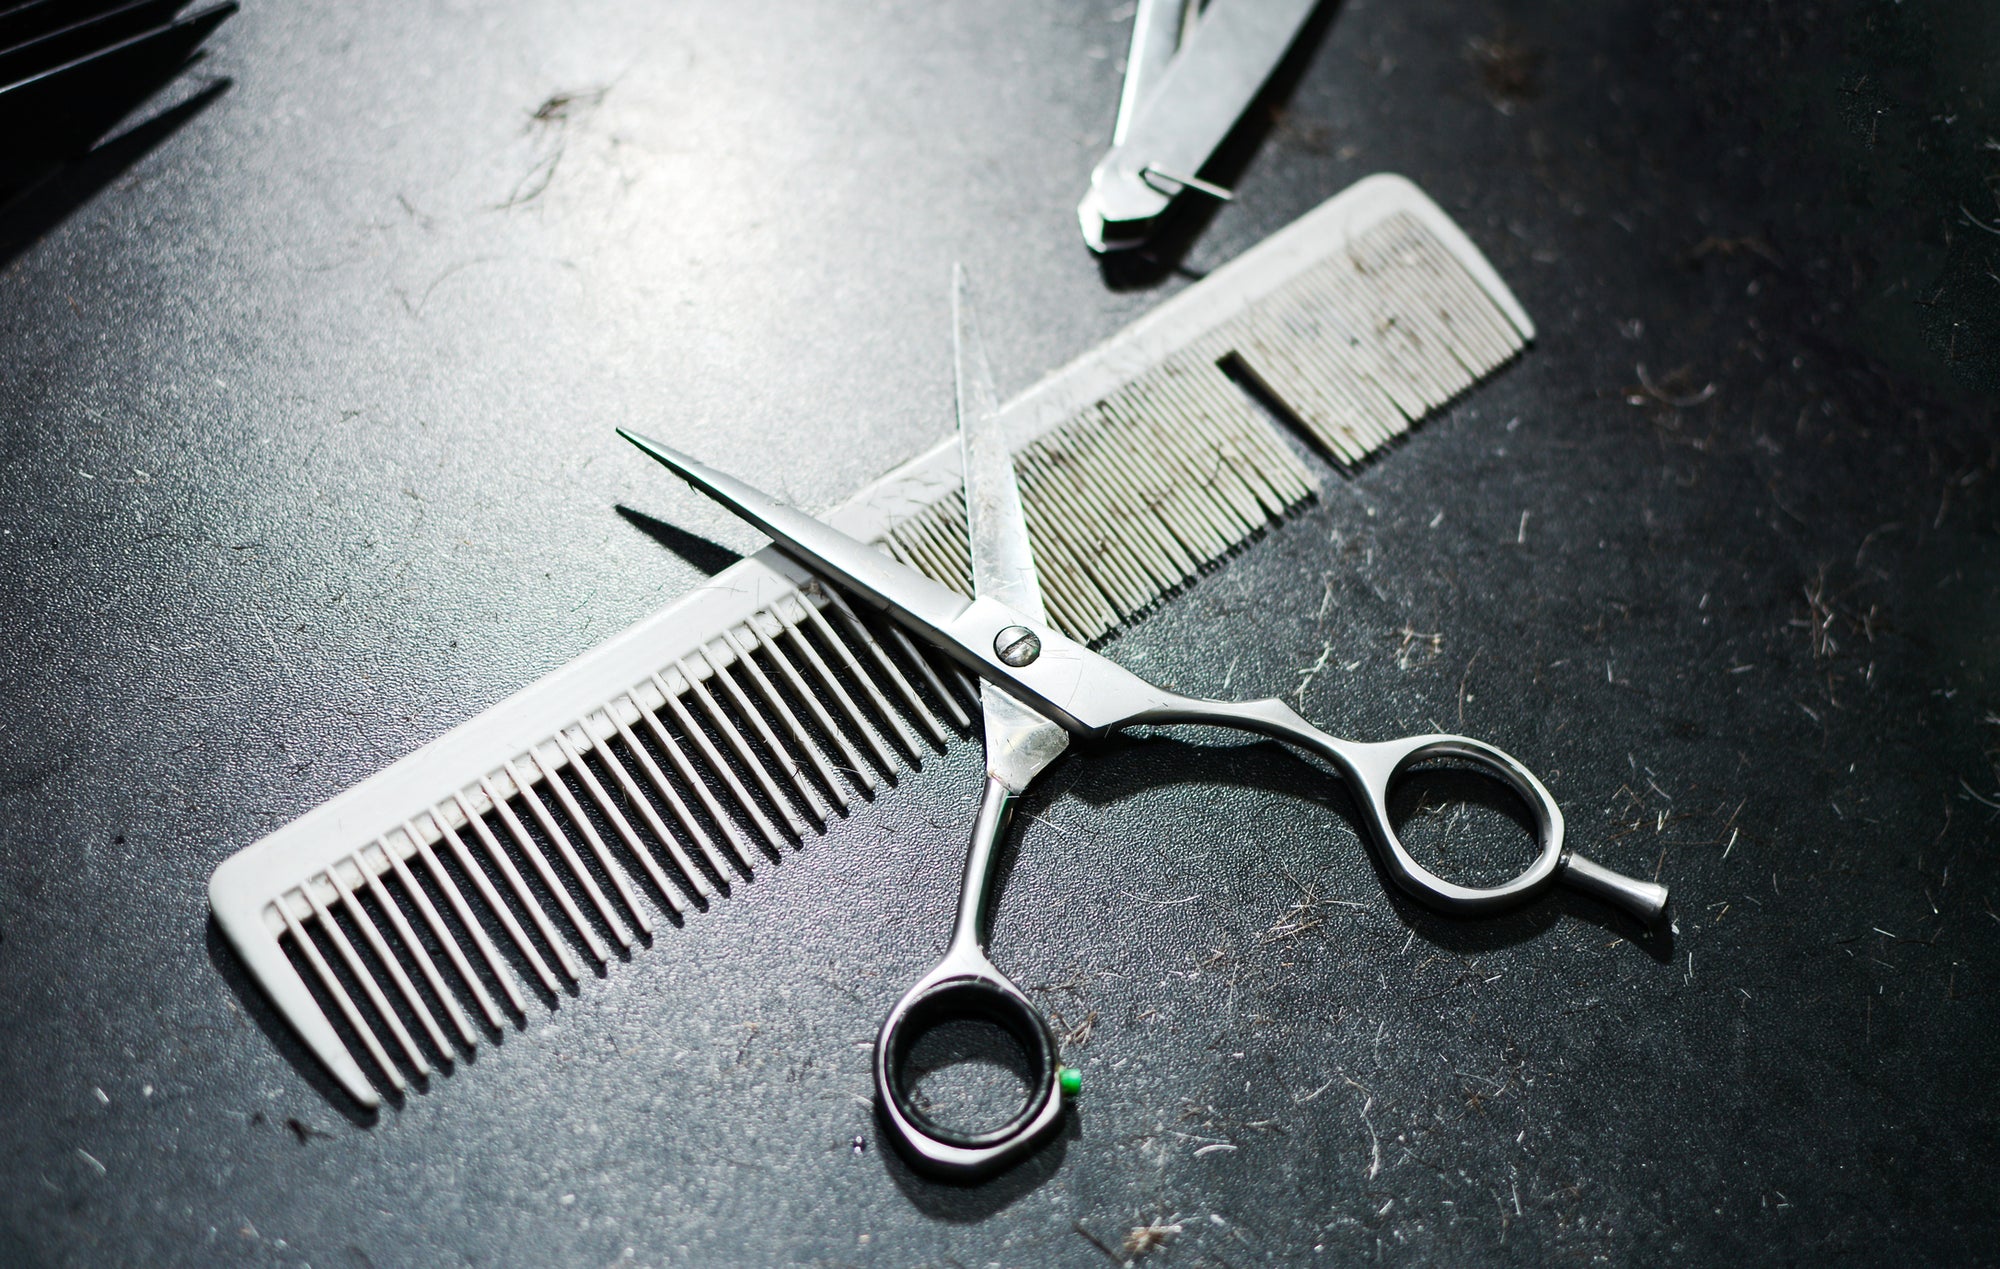 Cleaning and sanitizing your hairdressing scissors